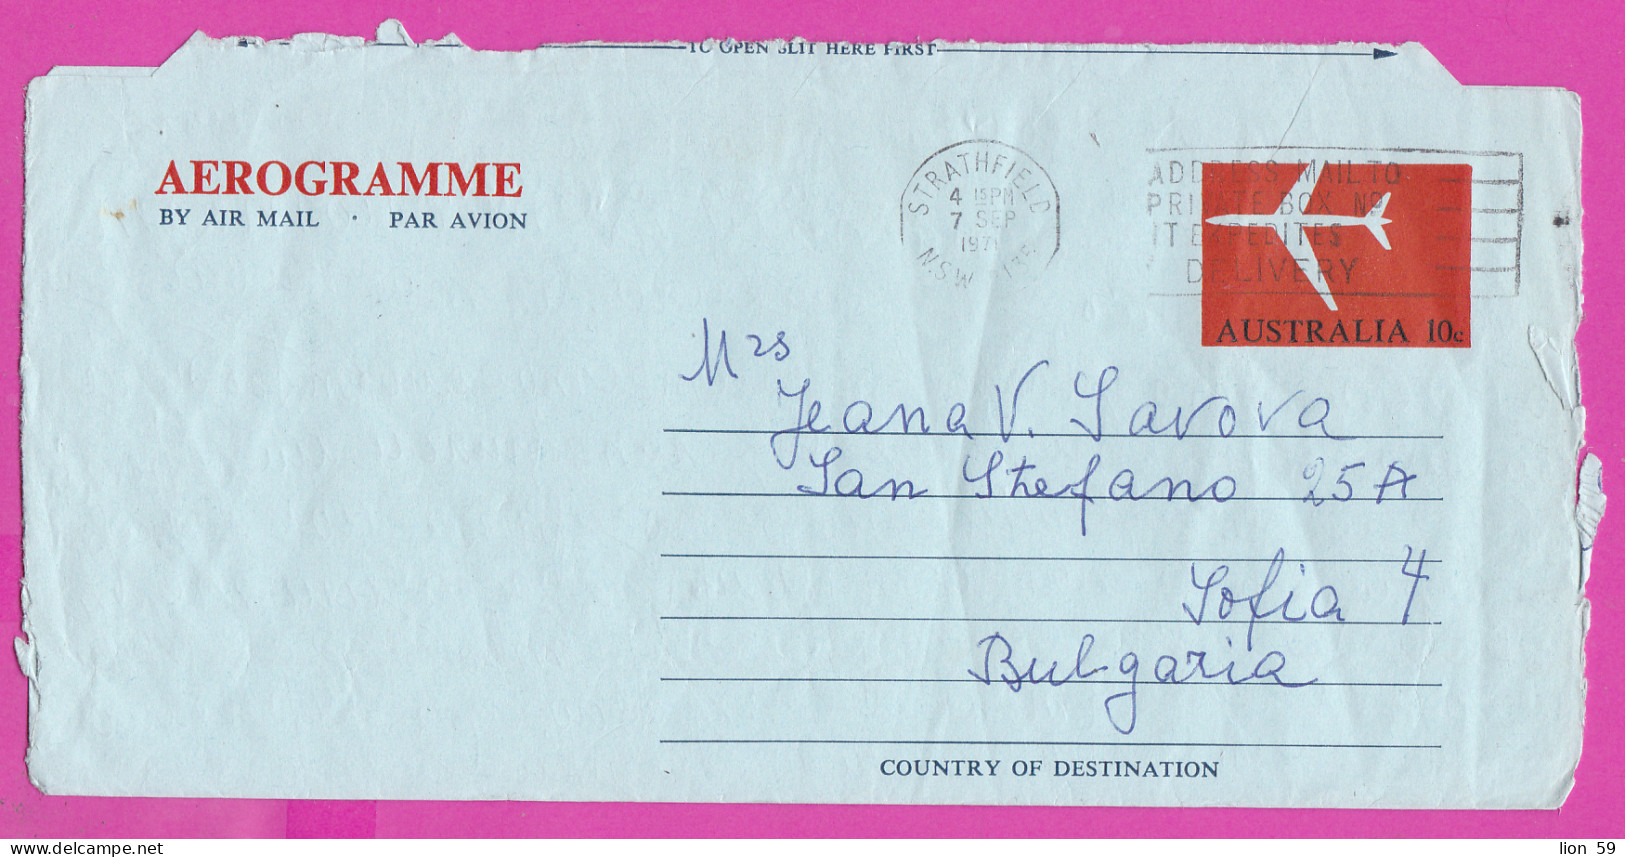 274793 / Australia Strathfield N.S.W. Aerogramme 1971 - 10c. Flamme Address Mail To Private Box No It Expedites Delivery - Aérogrammes